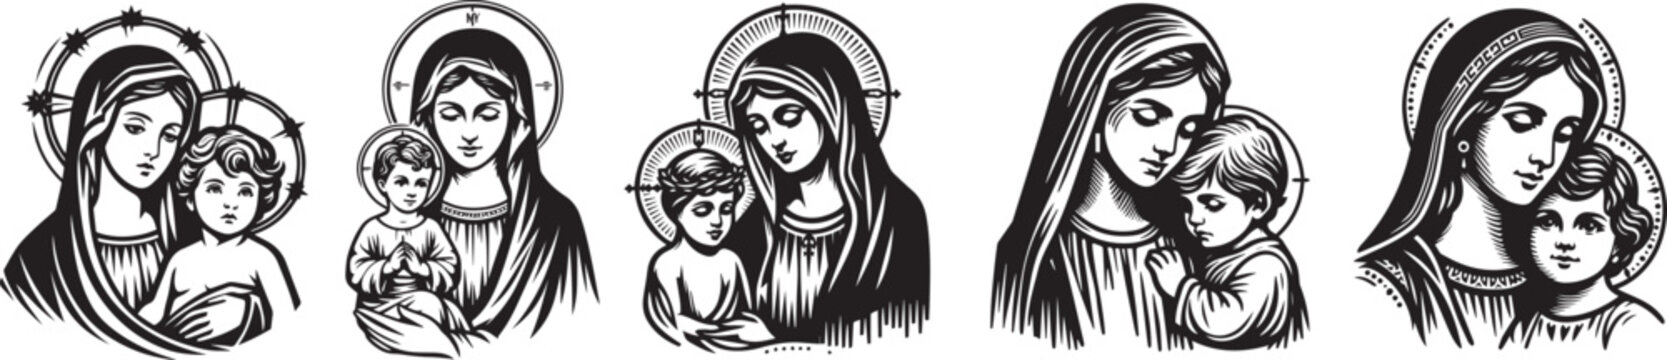 maternal warmth: mary embraces baby jesus in black vector laser cutting